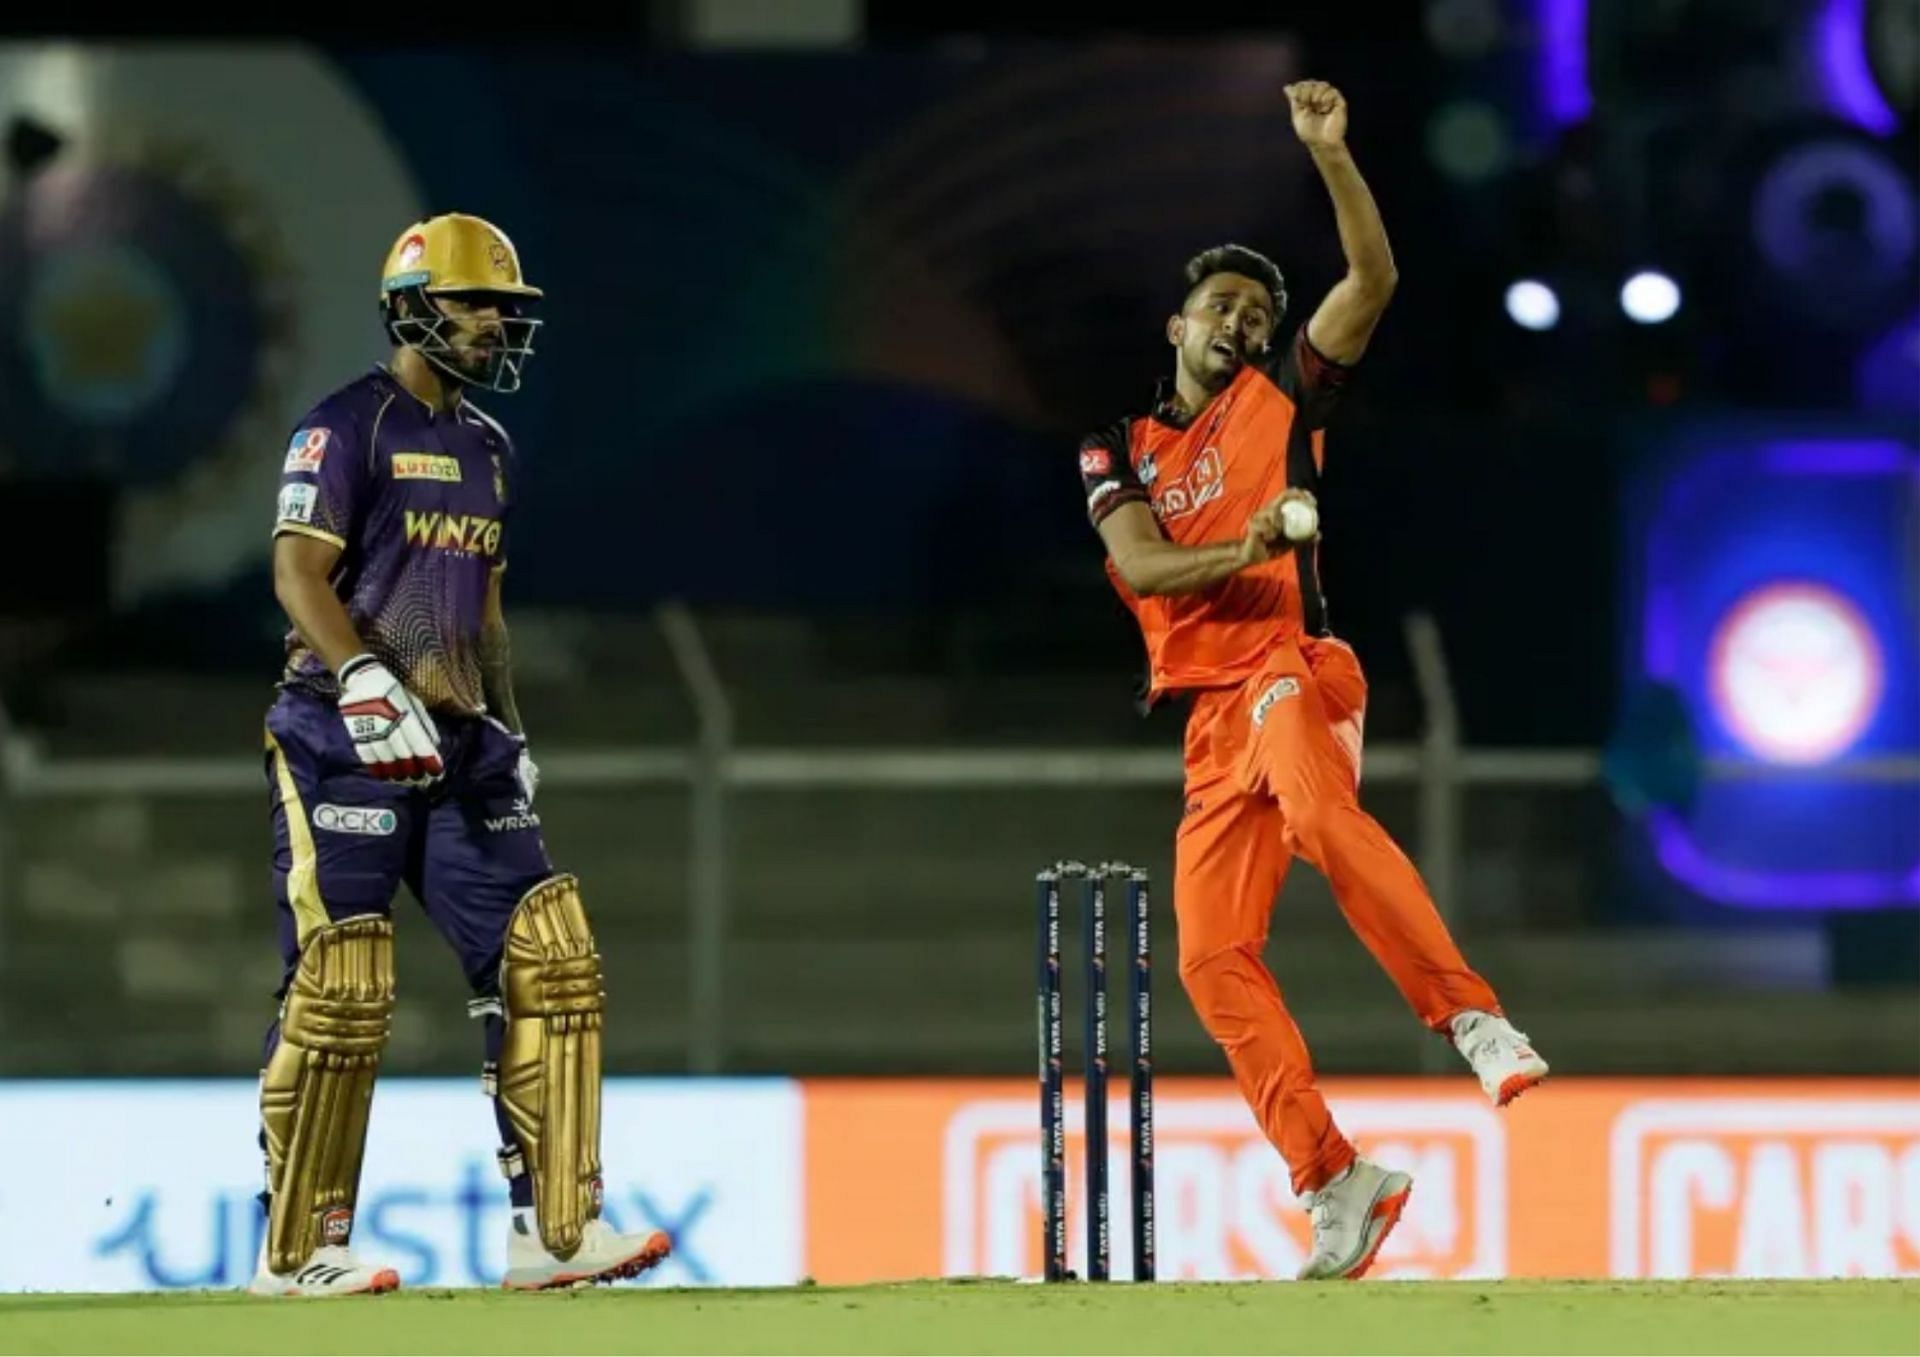 KKR and SRH have played out some thrillers in the years gone by (Picture Credits: BCCI).